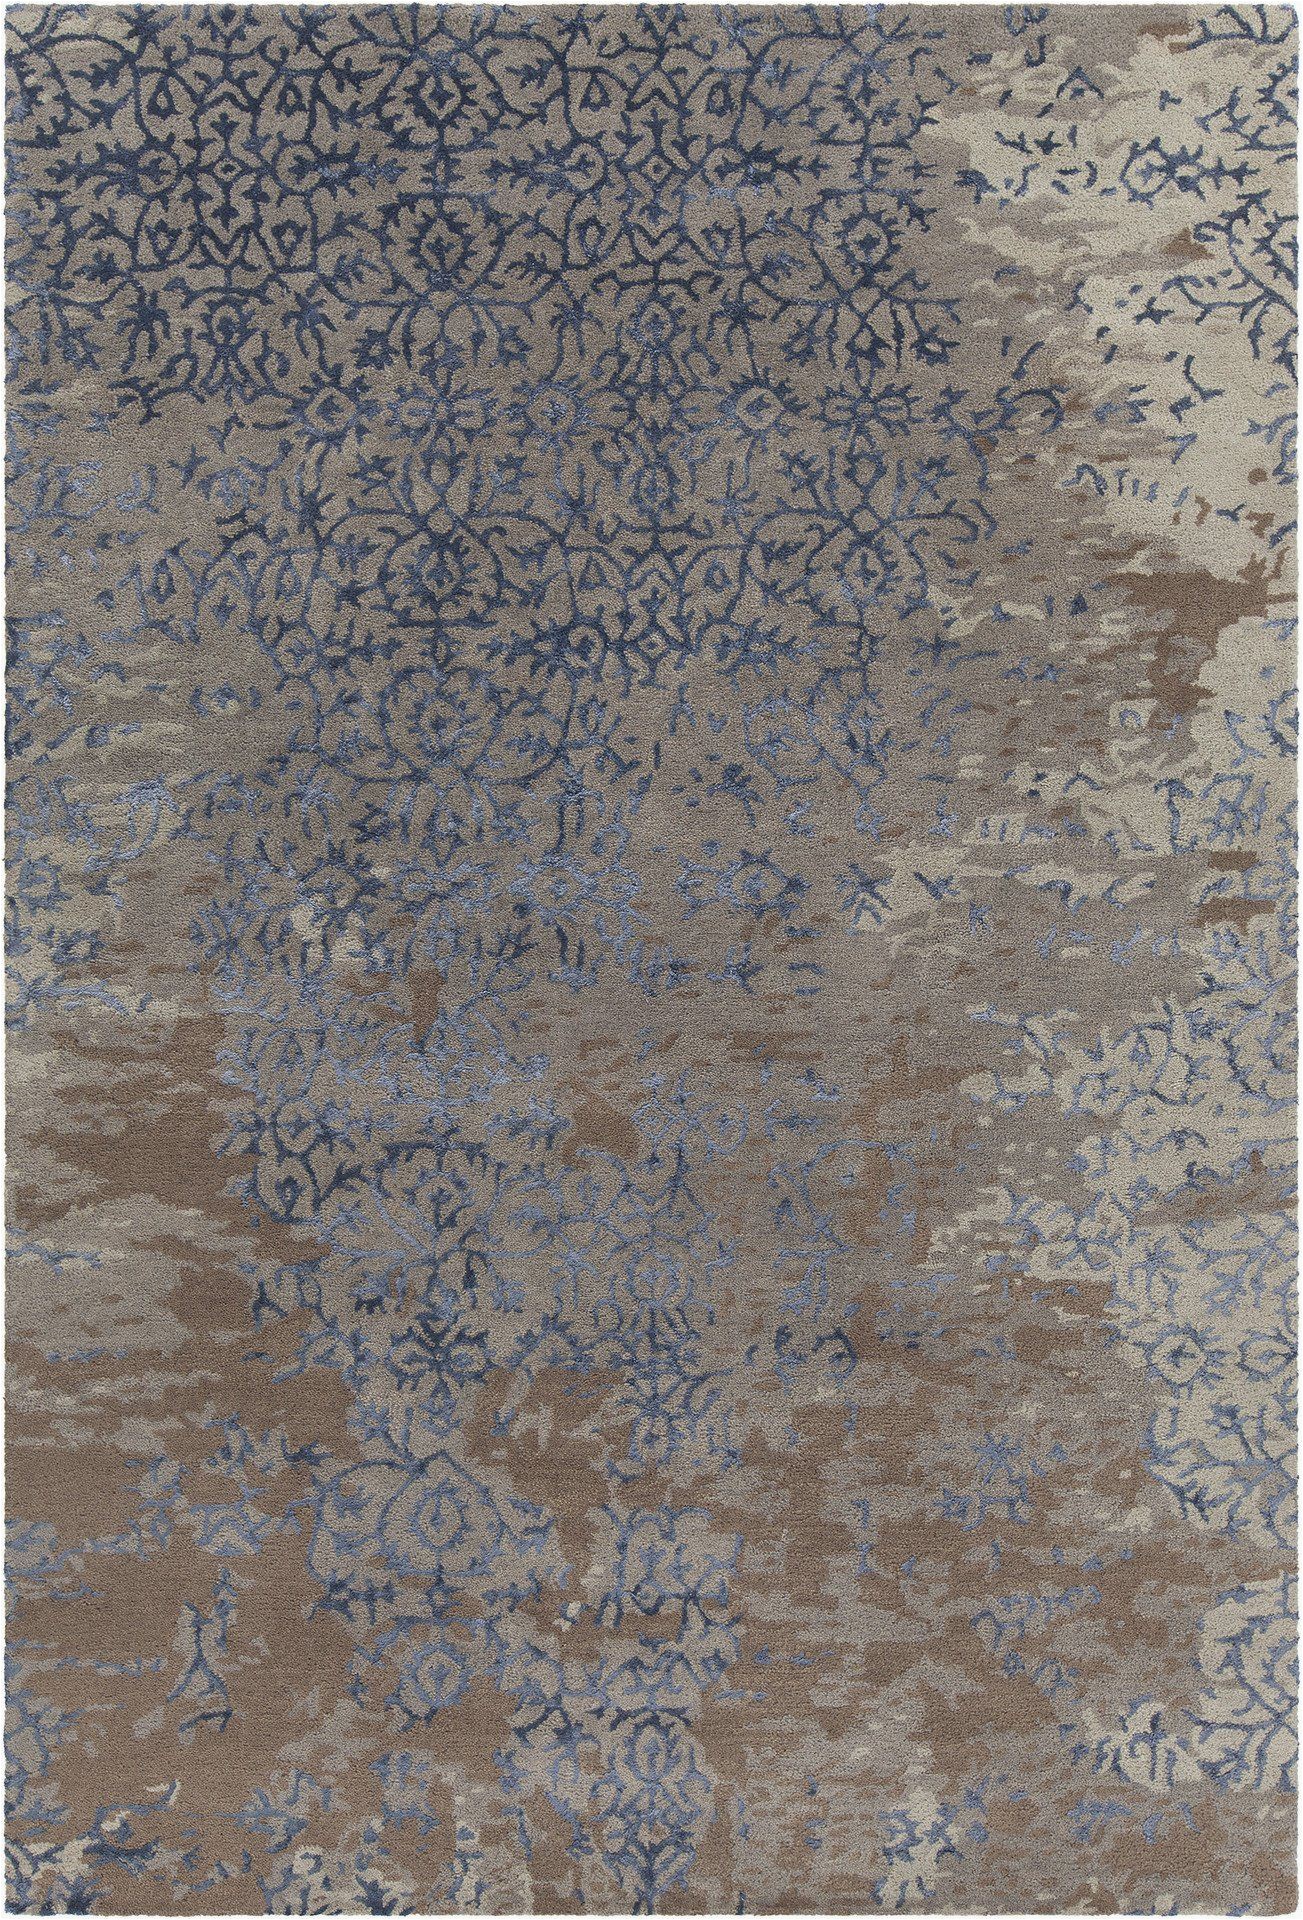 Area Rugs Blue and Tan Rupec Collection Hand Tufted area Rug In Grey Blue & Brown